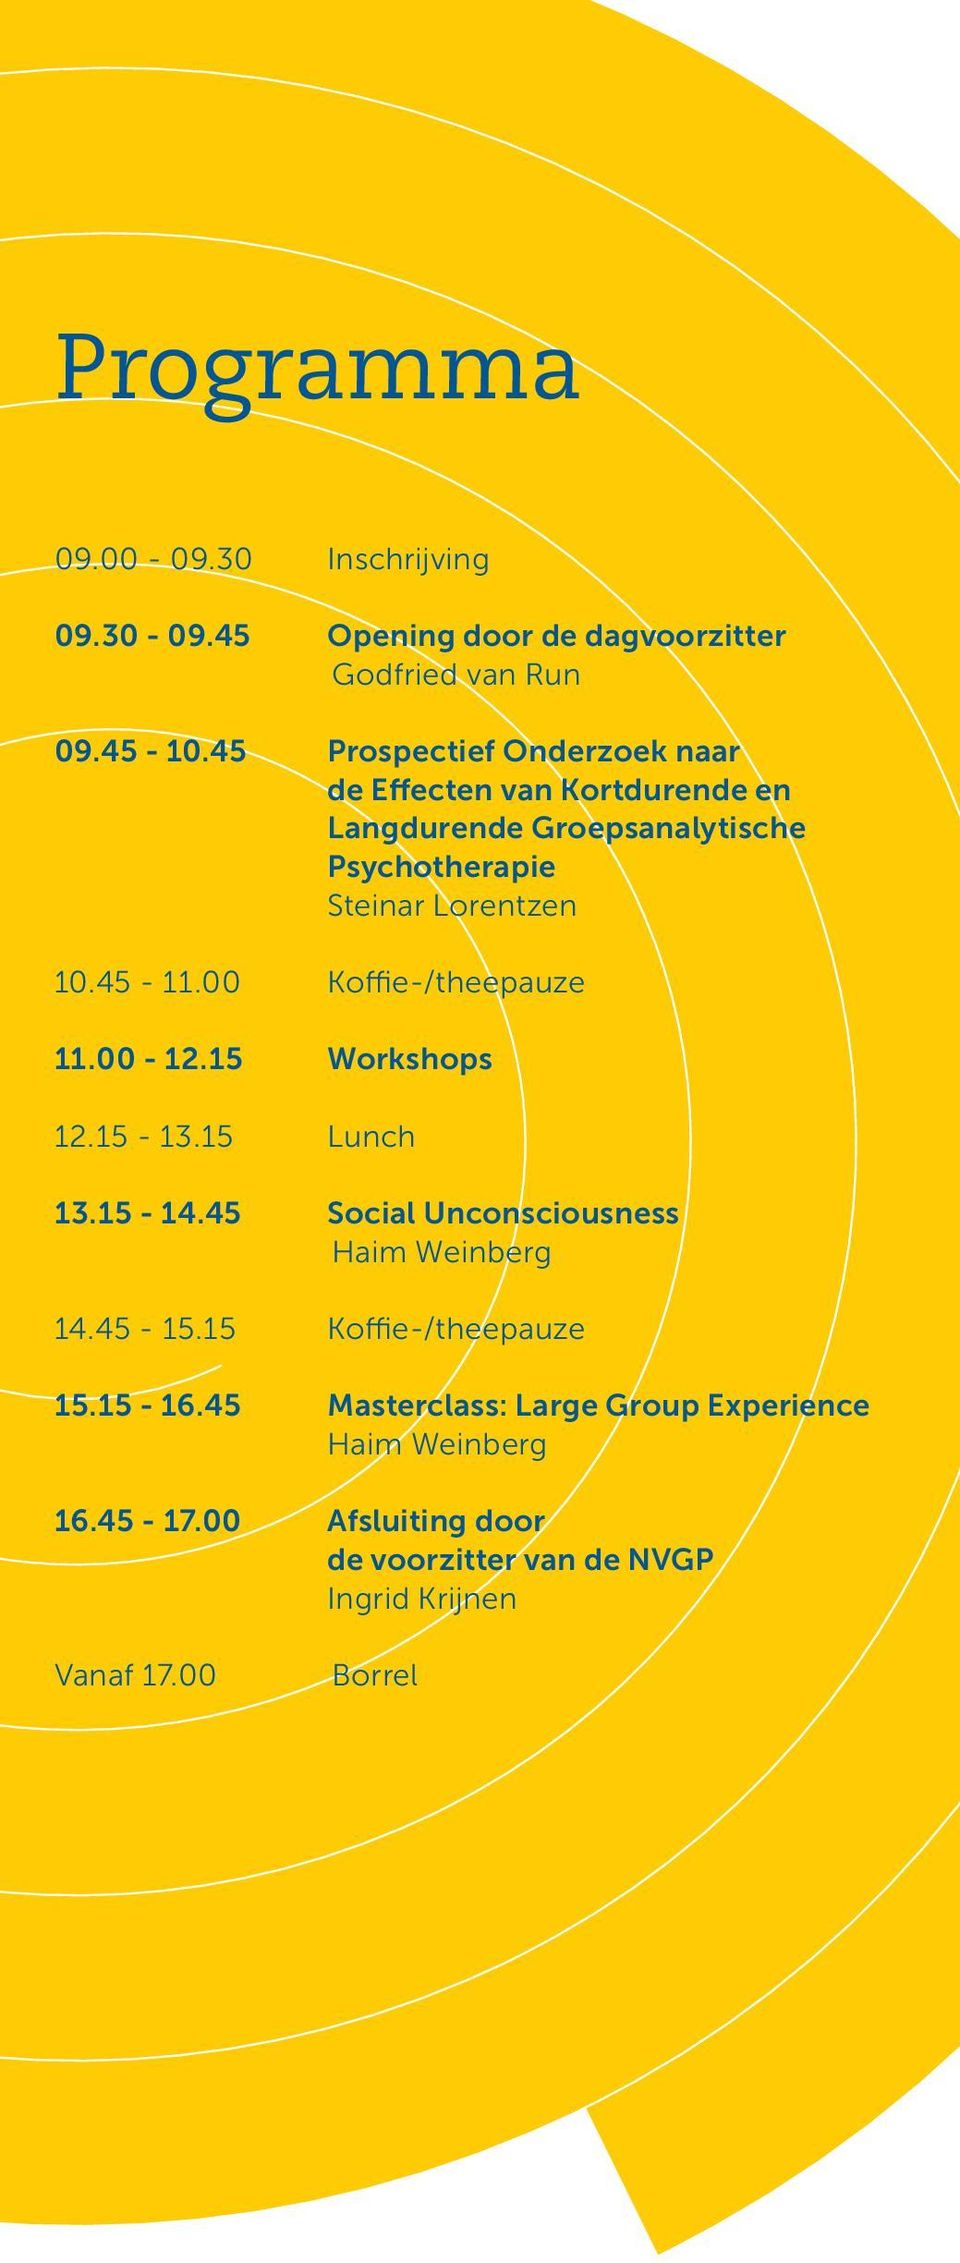 45-11.00 Koffie-/theepauze 11.00-12.15 Workshops 12.15-13.15 Lunch 13.15-14.45 Social Unconsciousness Haim Weinberg 14.45-15.